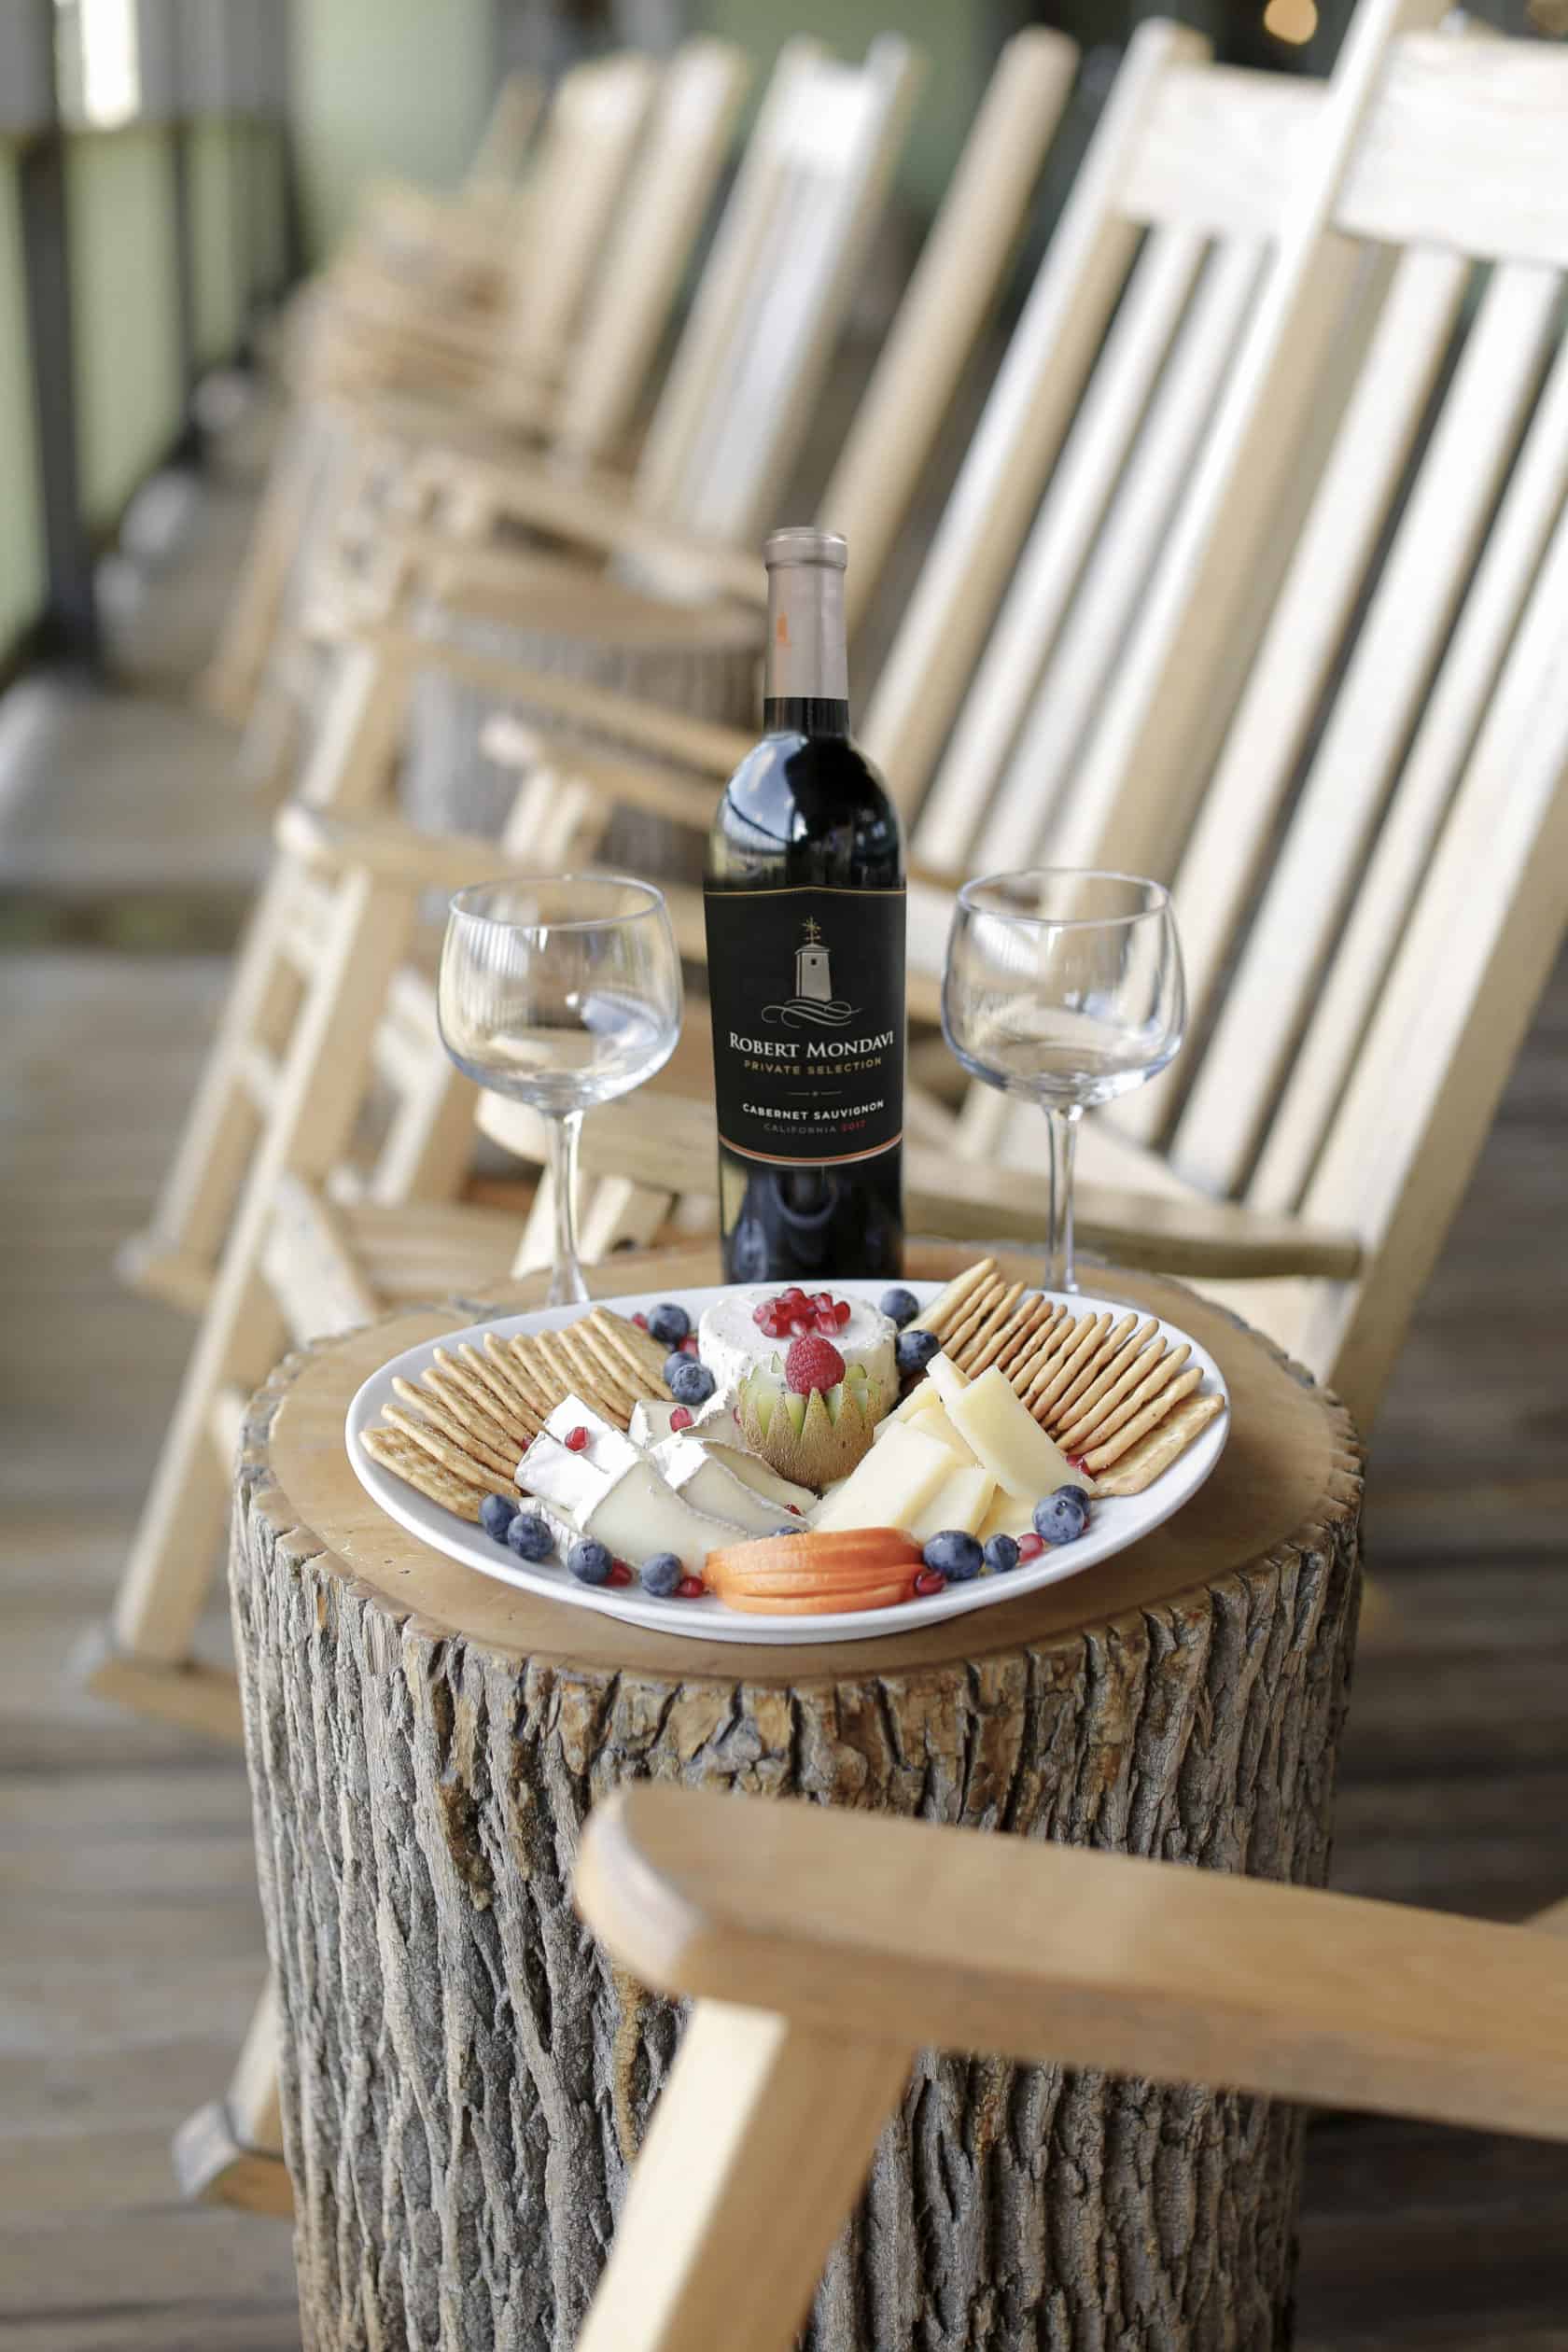 wine and cheese plate by rocking chairs